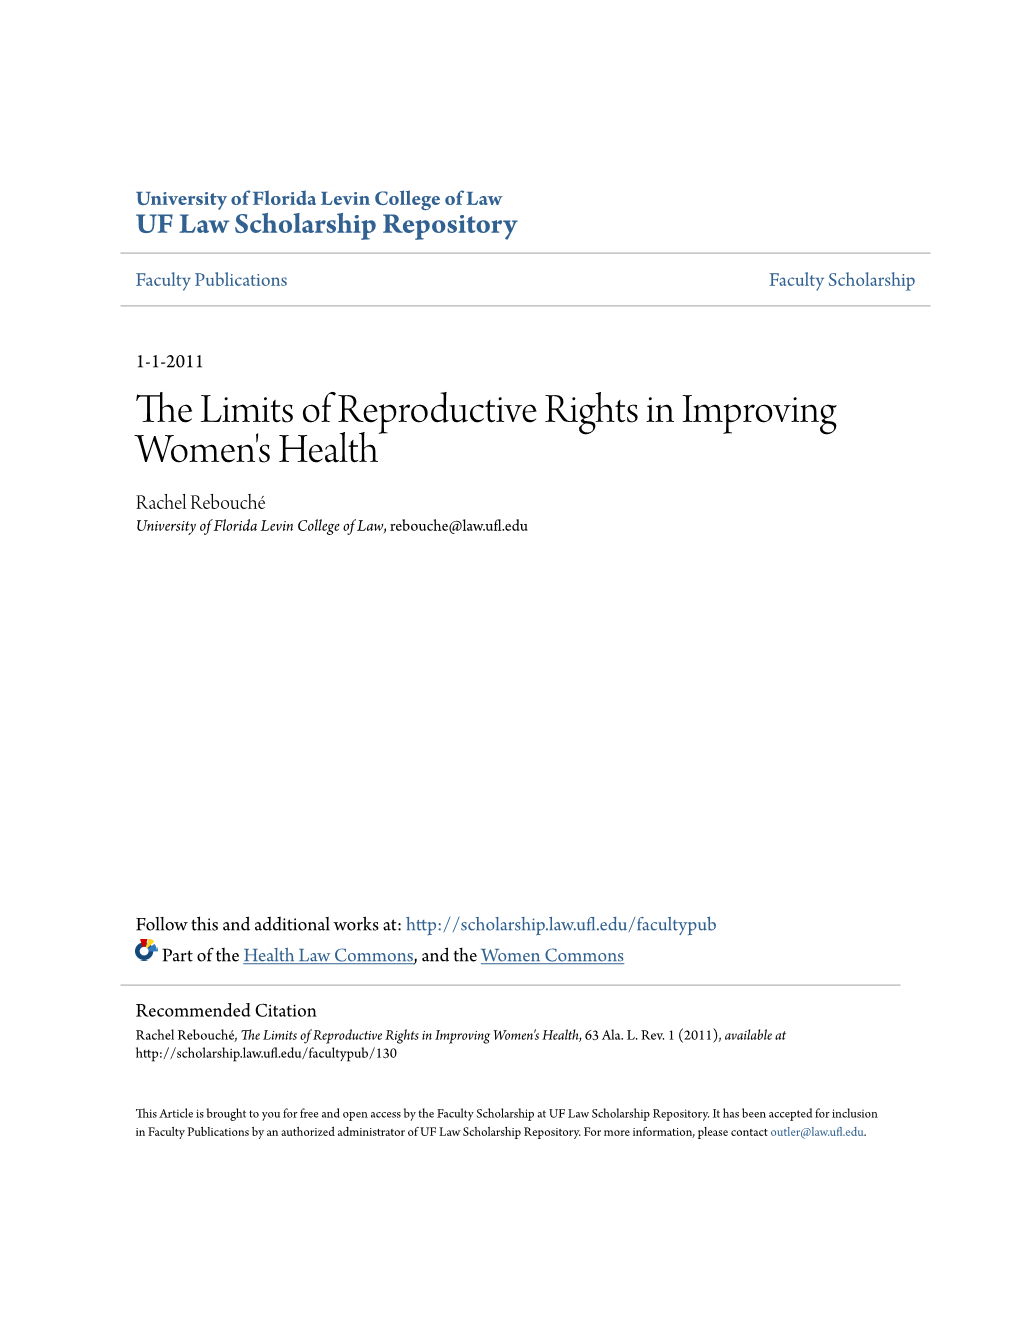 The Limits of Reproductive Rights in Improving Women's Health Rachel Rebouché University of Florida Levin College of Law, Rebouche@Law.Ufl.Edu